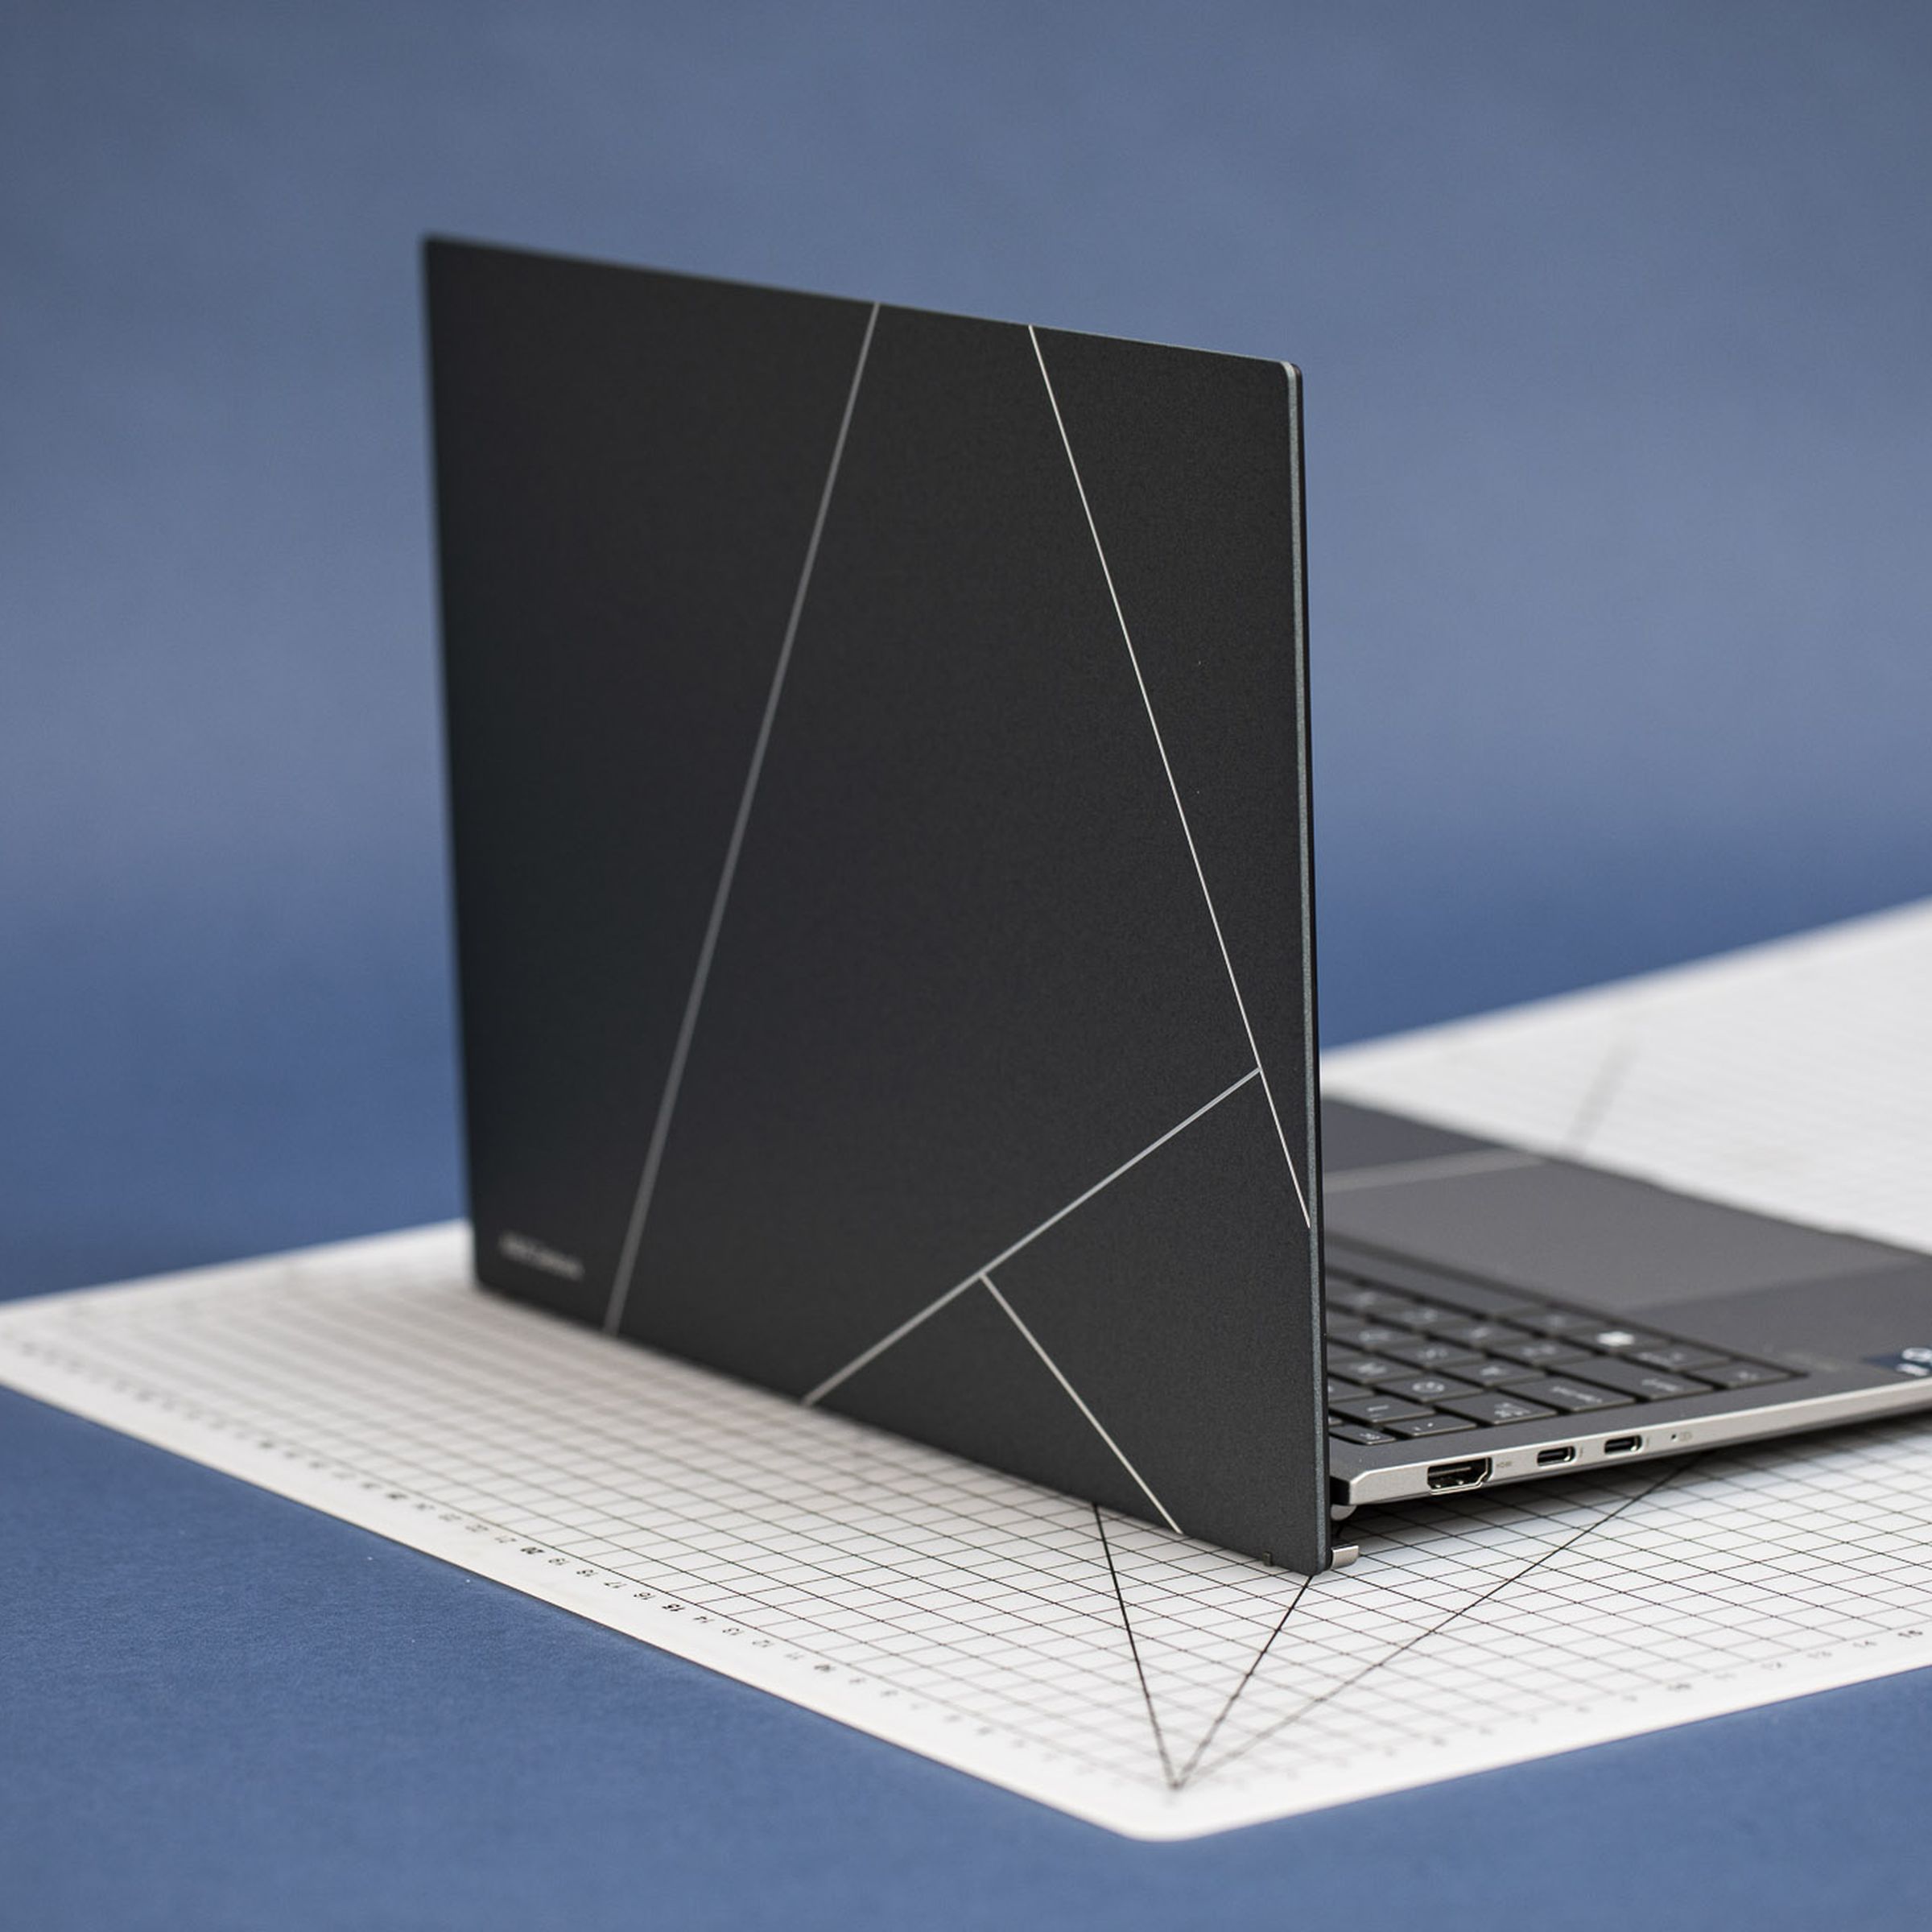 The Asus Zenbook S 13 OLED seen from the back right.